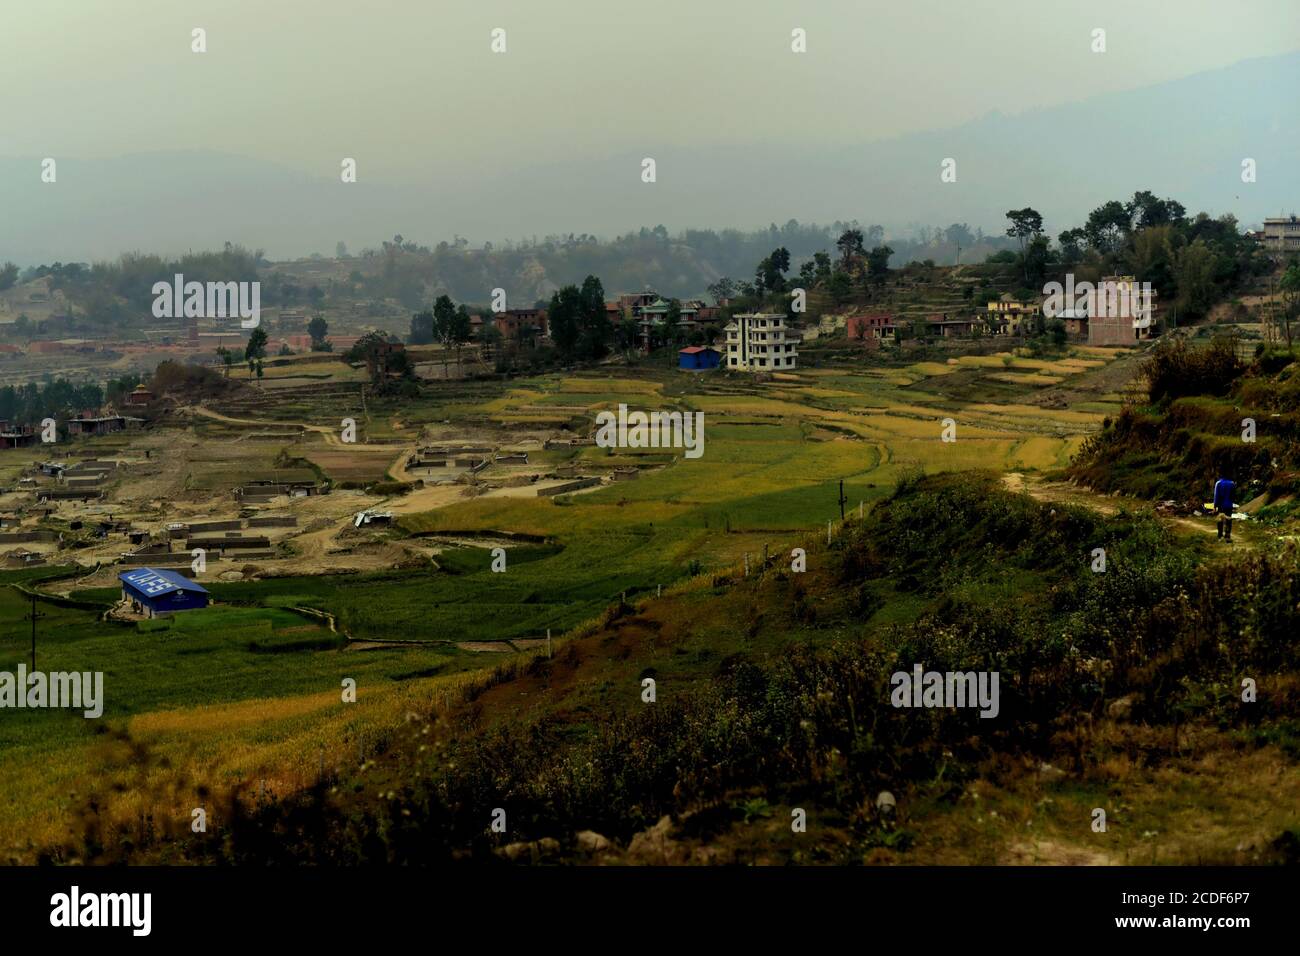 A man walking on rural pathway, overlooking agricultural fields partly converted into building materials factory on the outskirts of Kathmandu, Nepal. Stock Photo